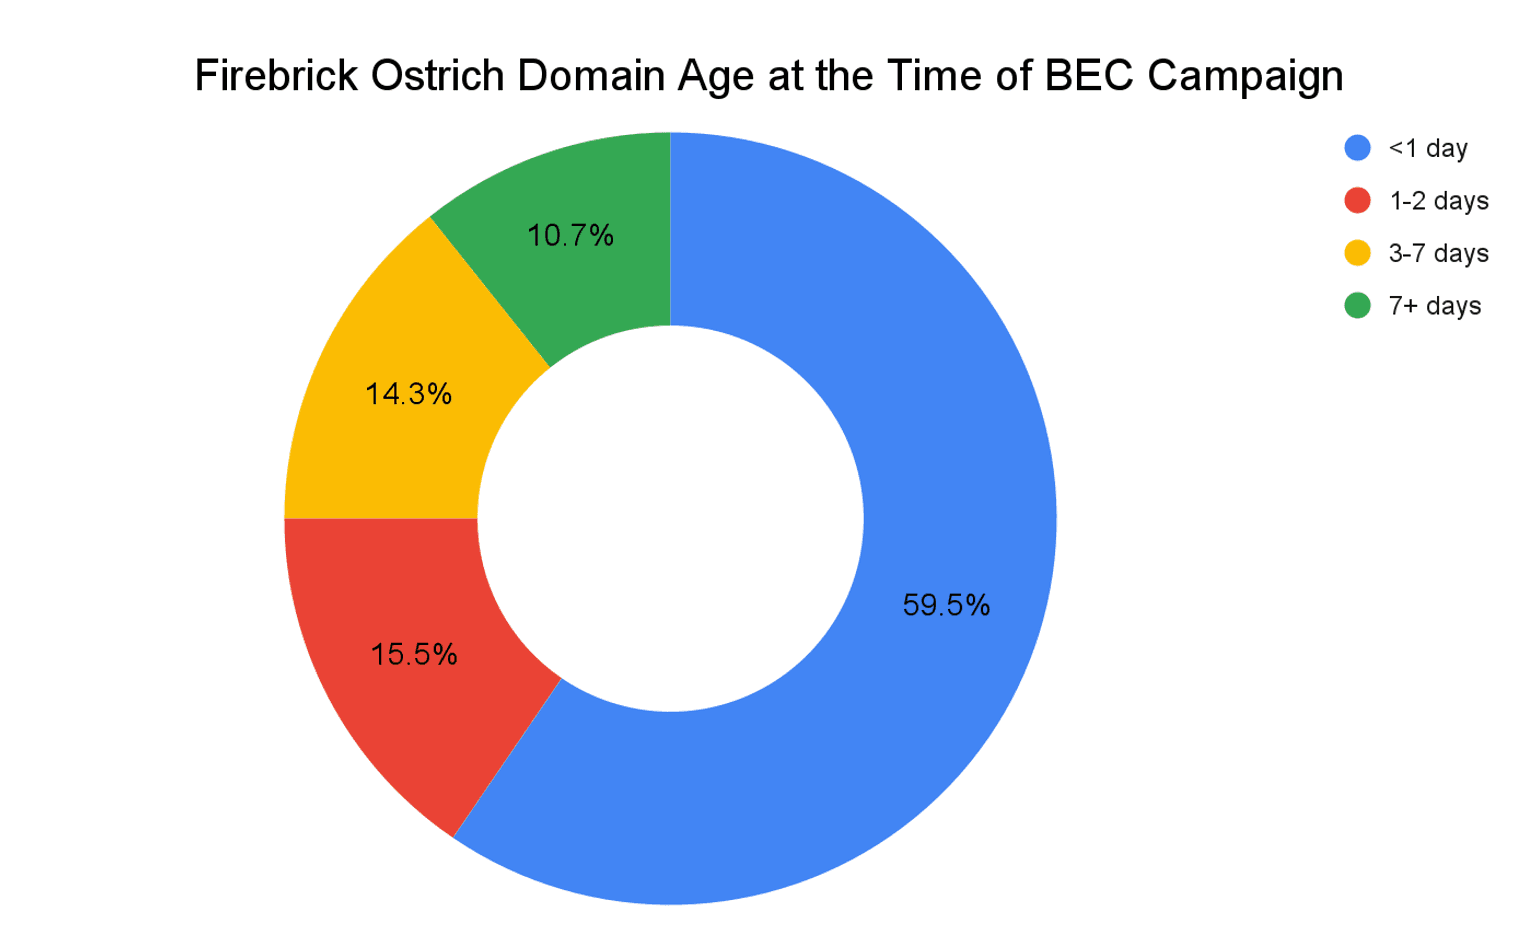 Firebrick Ostrich Domain Age at Time of BEC Campaign